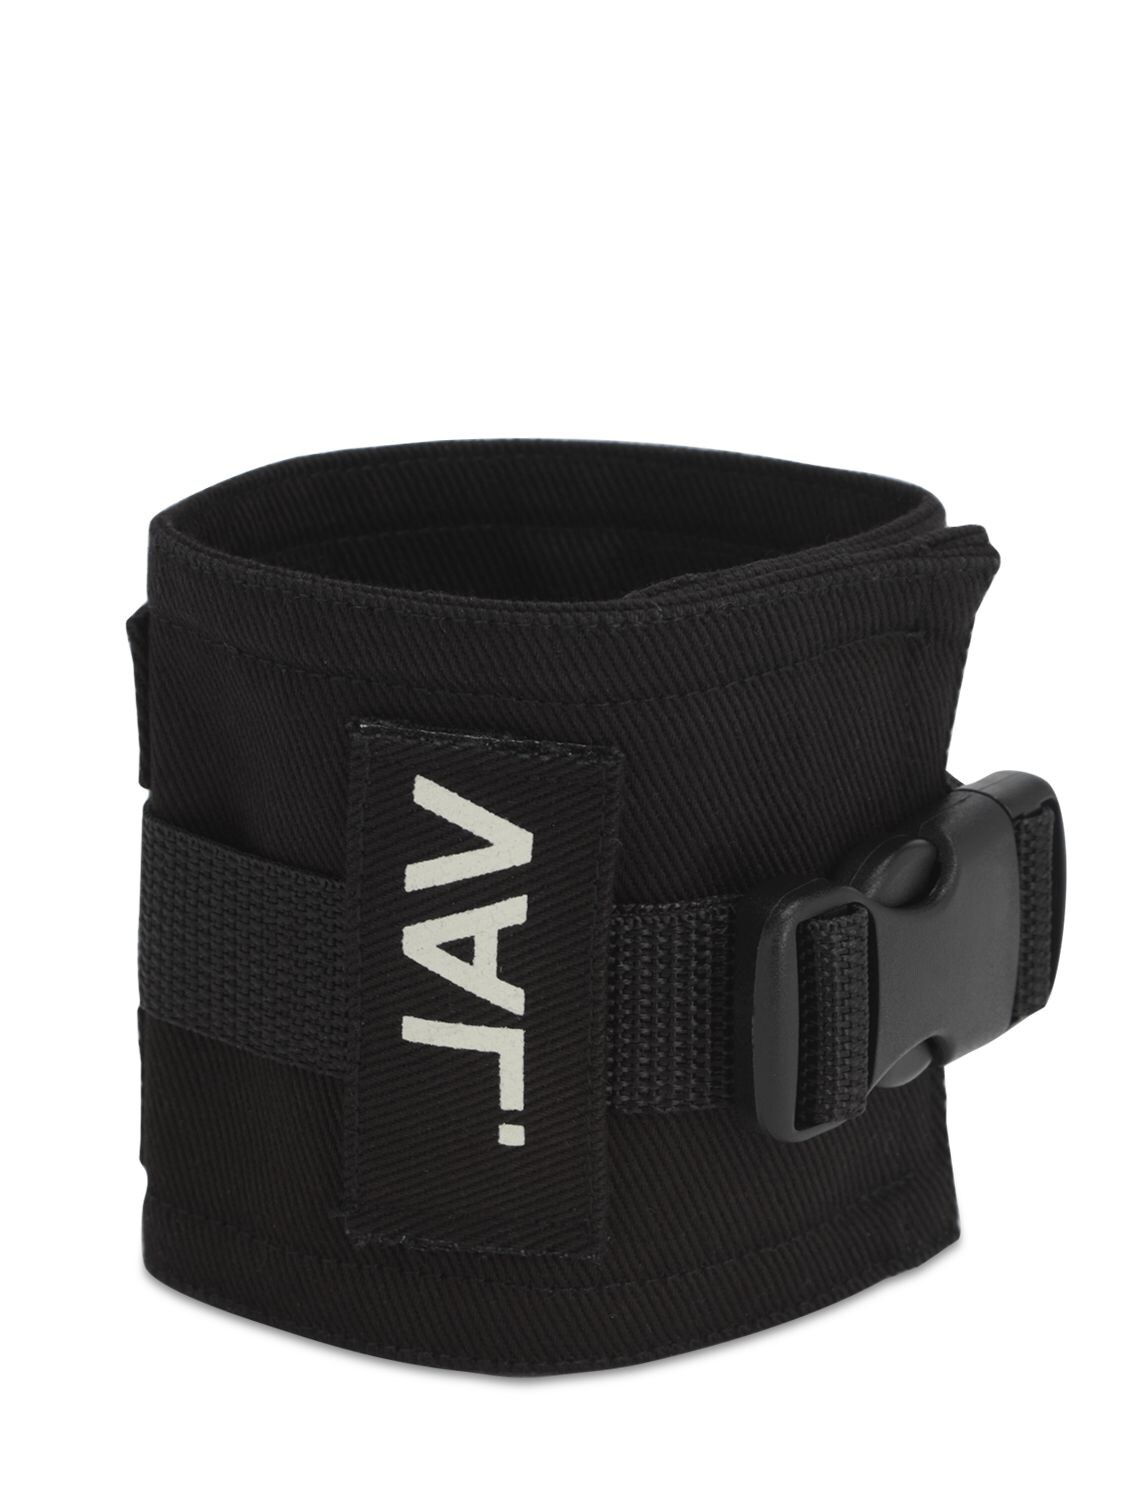 Val Kristopher Extend Canvas Ankle Strap W/ Clip In Black